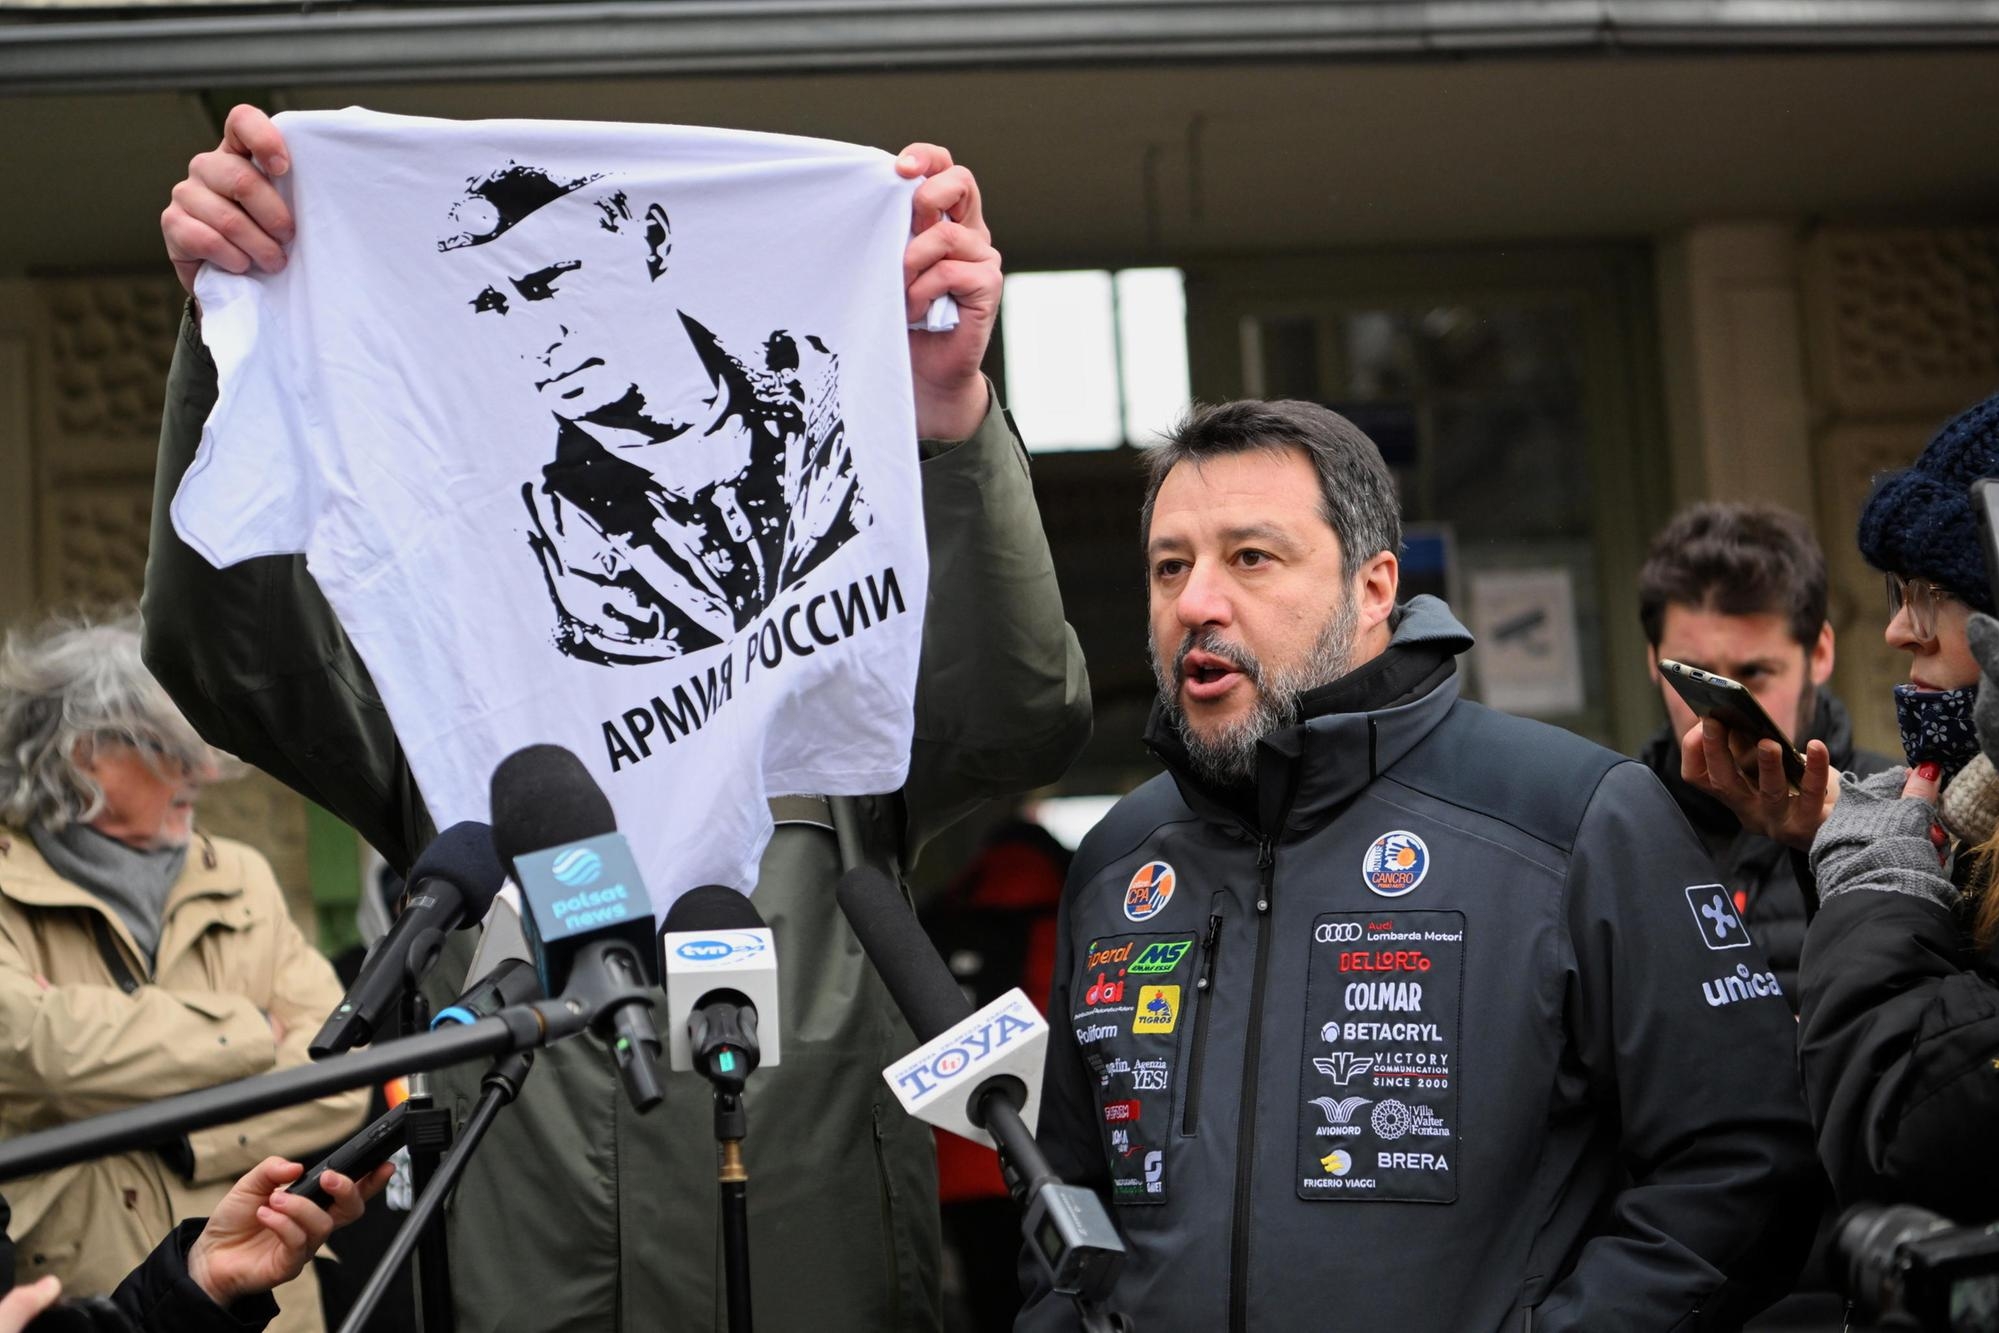 Mayor of Przemysl Wojciech Bakun shows a t-shirt with putin's Portrait and slogan 'Russian Army' during a press conference with Former Deputy Prime Minister of Italy, and Lega leader Matteo Salvini (R) in front of the Main Railway Station in Przemysl, Poland 08 March 2022. Mayor Bakun unsuccessfully tried to hand Matteo Salvini a T-shirt with an image of Vladimir Putin, similar to one Salvini was posing with at Kremlin during a visit to Moscow and asked the italian senator to wear it during a visit to refugees reception center close to the border with Ukraine. ANSA/DAREK DELMANOWICZ POLAND OUT